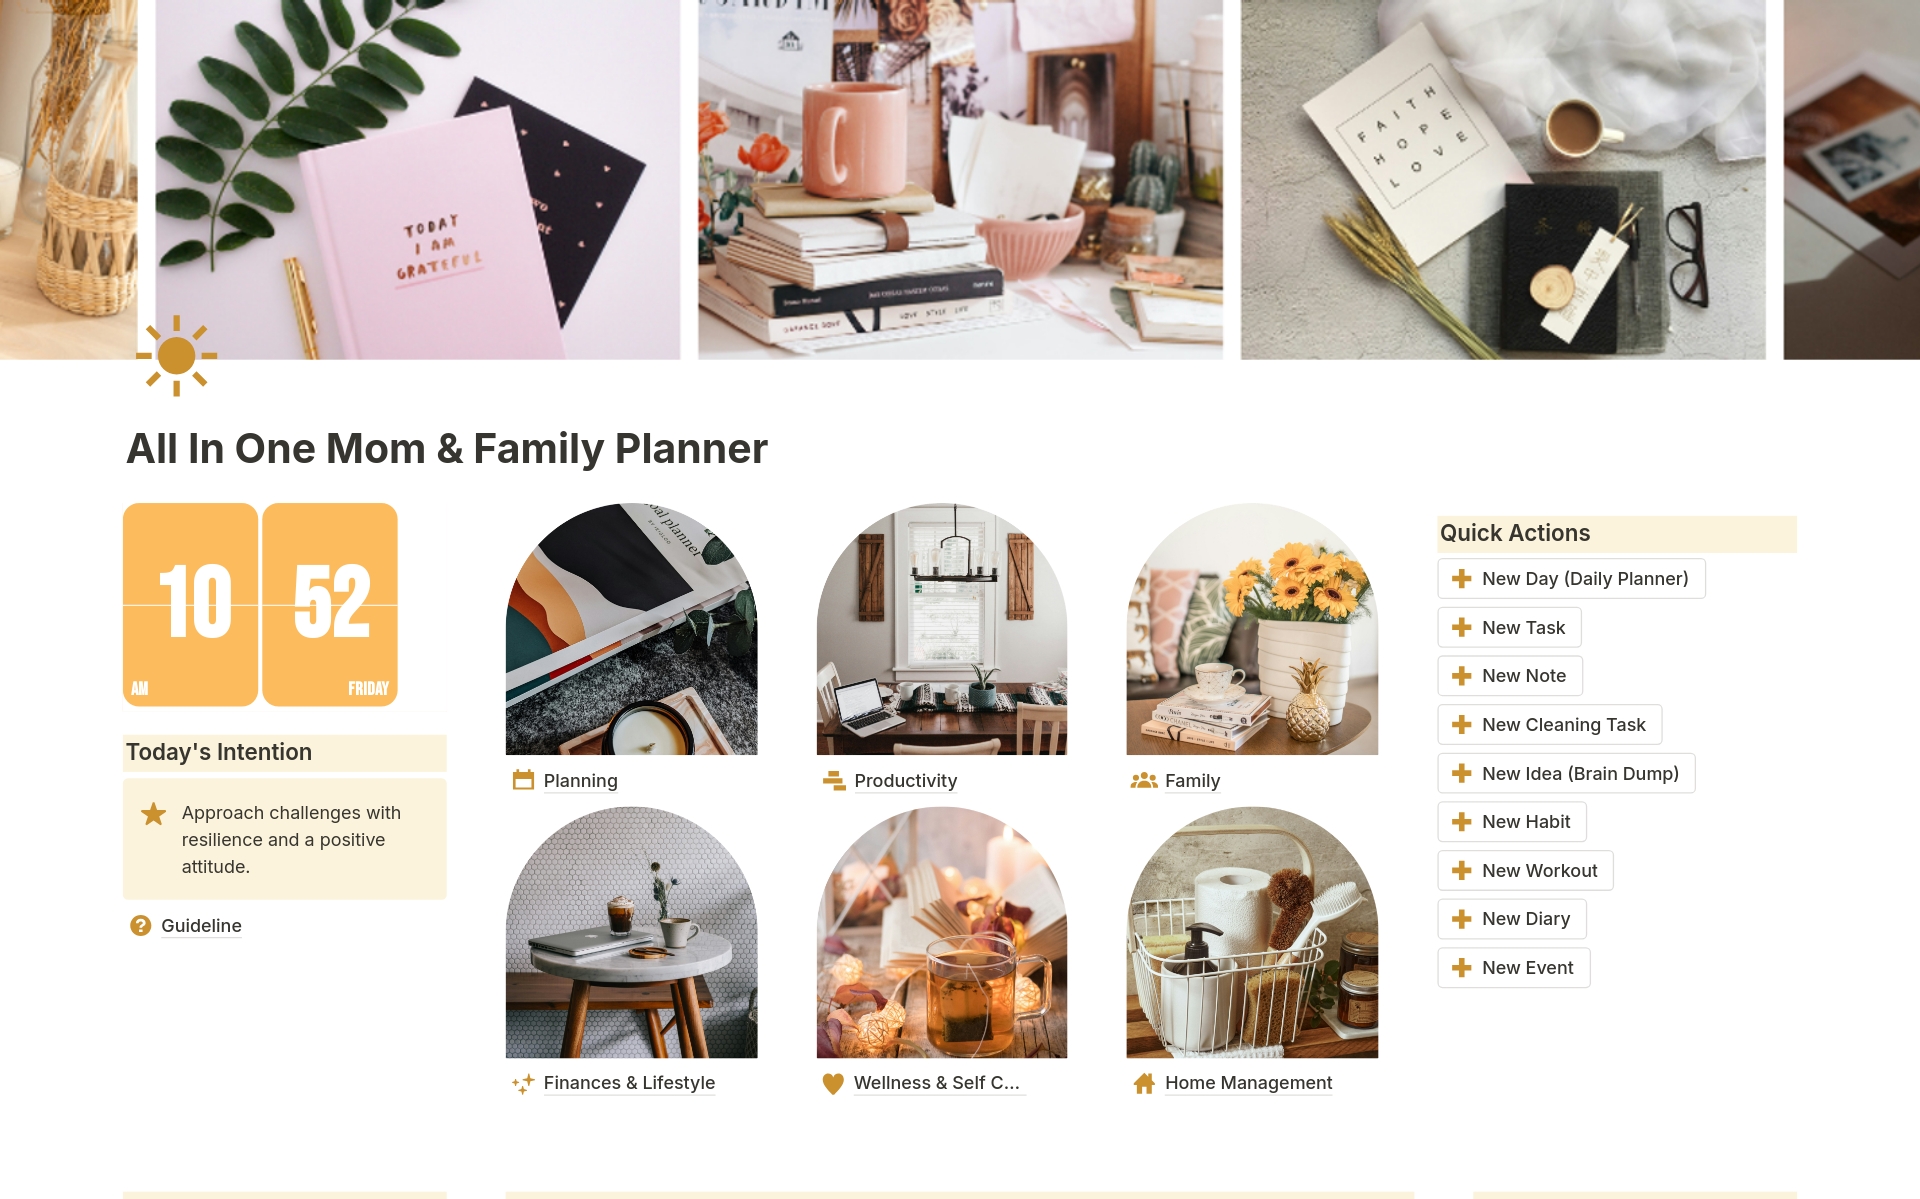 All in One Mom and Family Life Planner님의 템플릿 미리보기